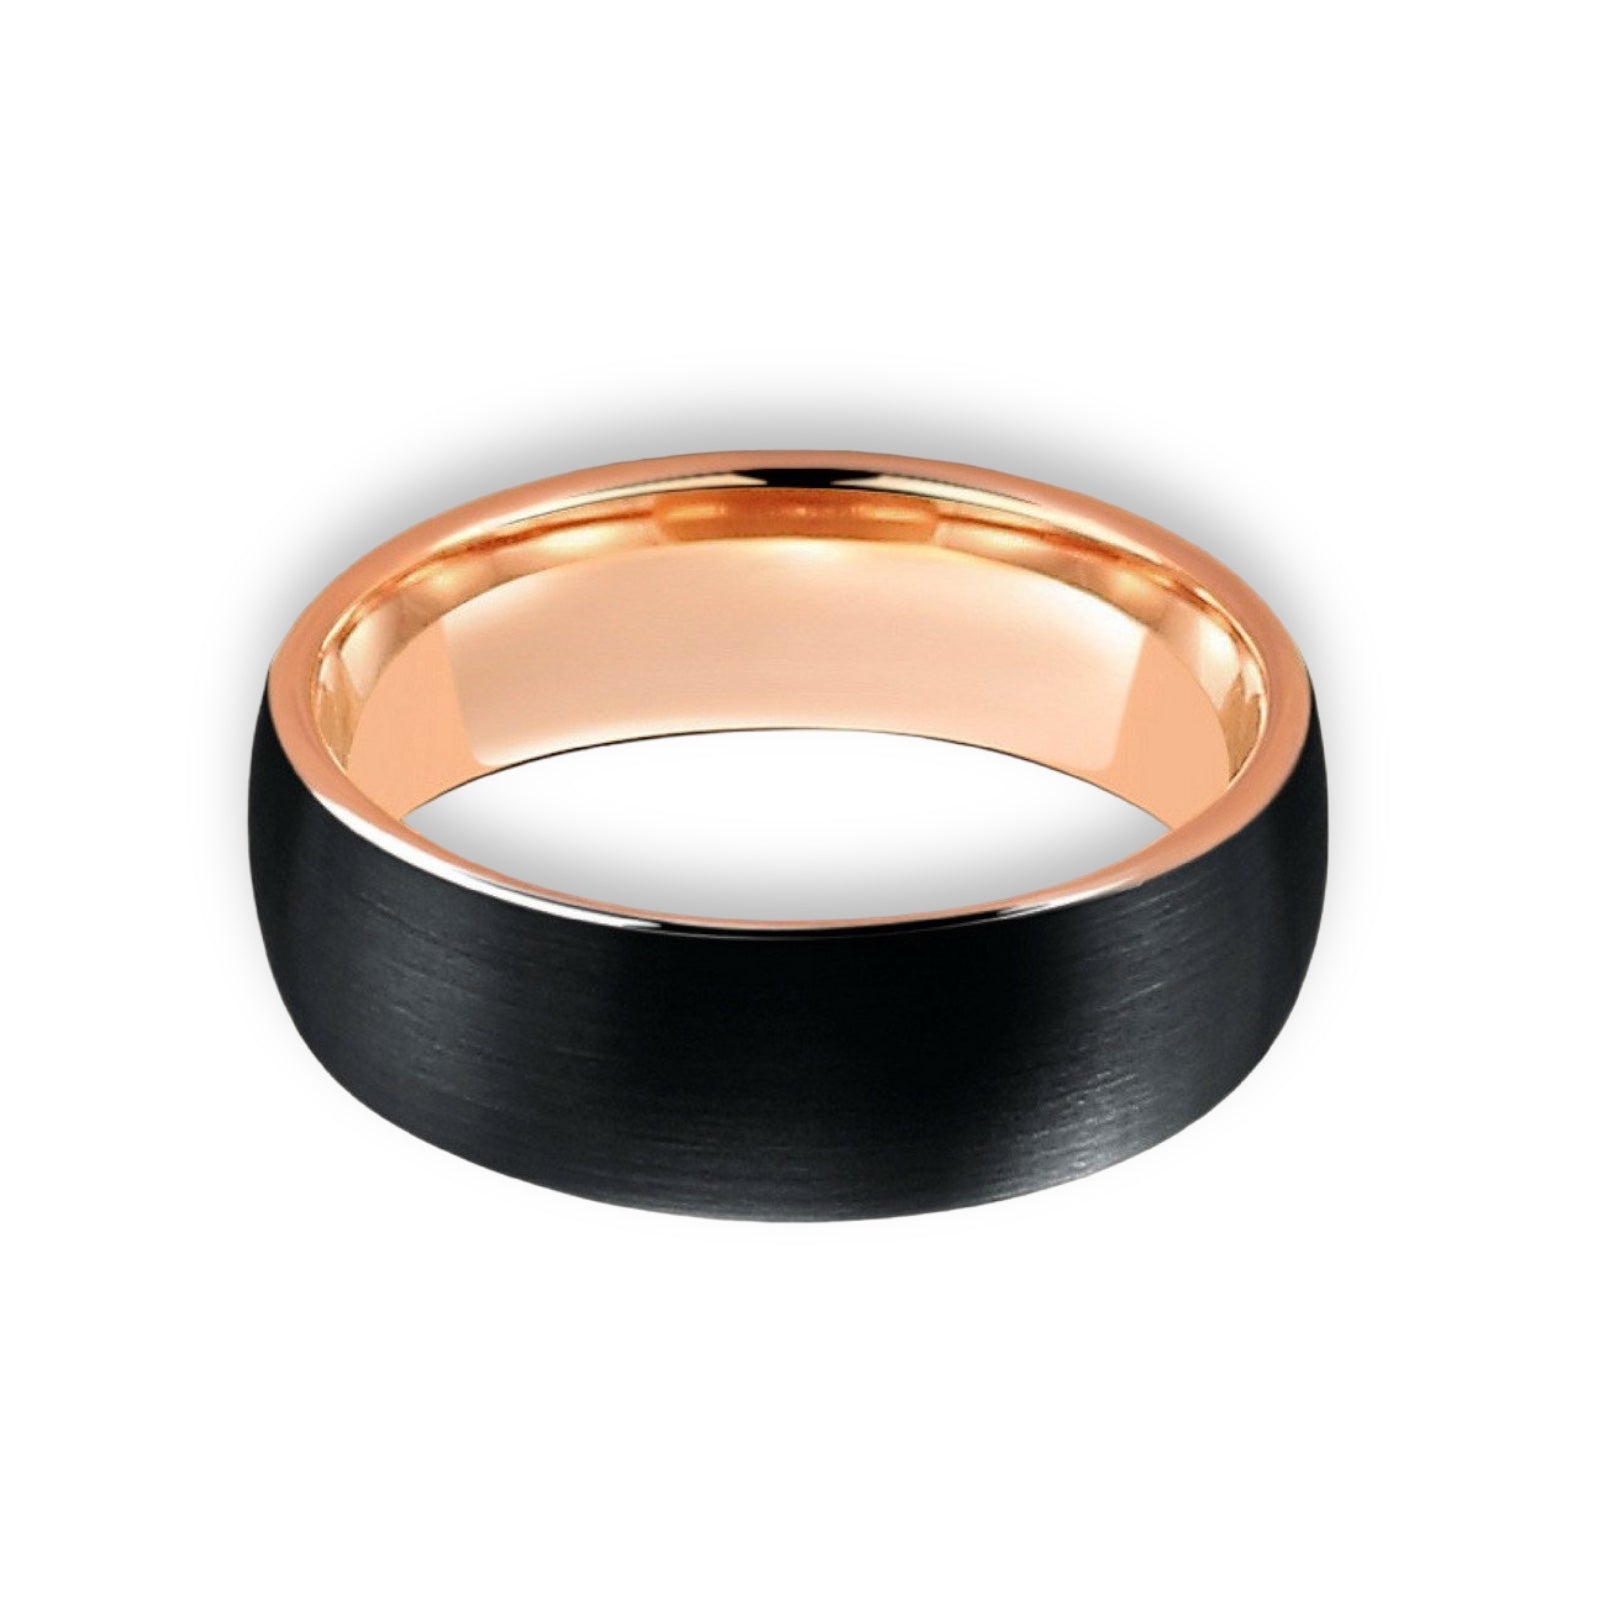 Tungsten Ring Brushed Matte Finish With Inside Rose Gold Dome Edge Band